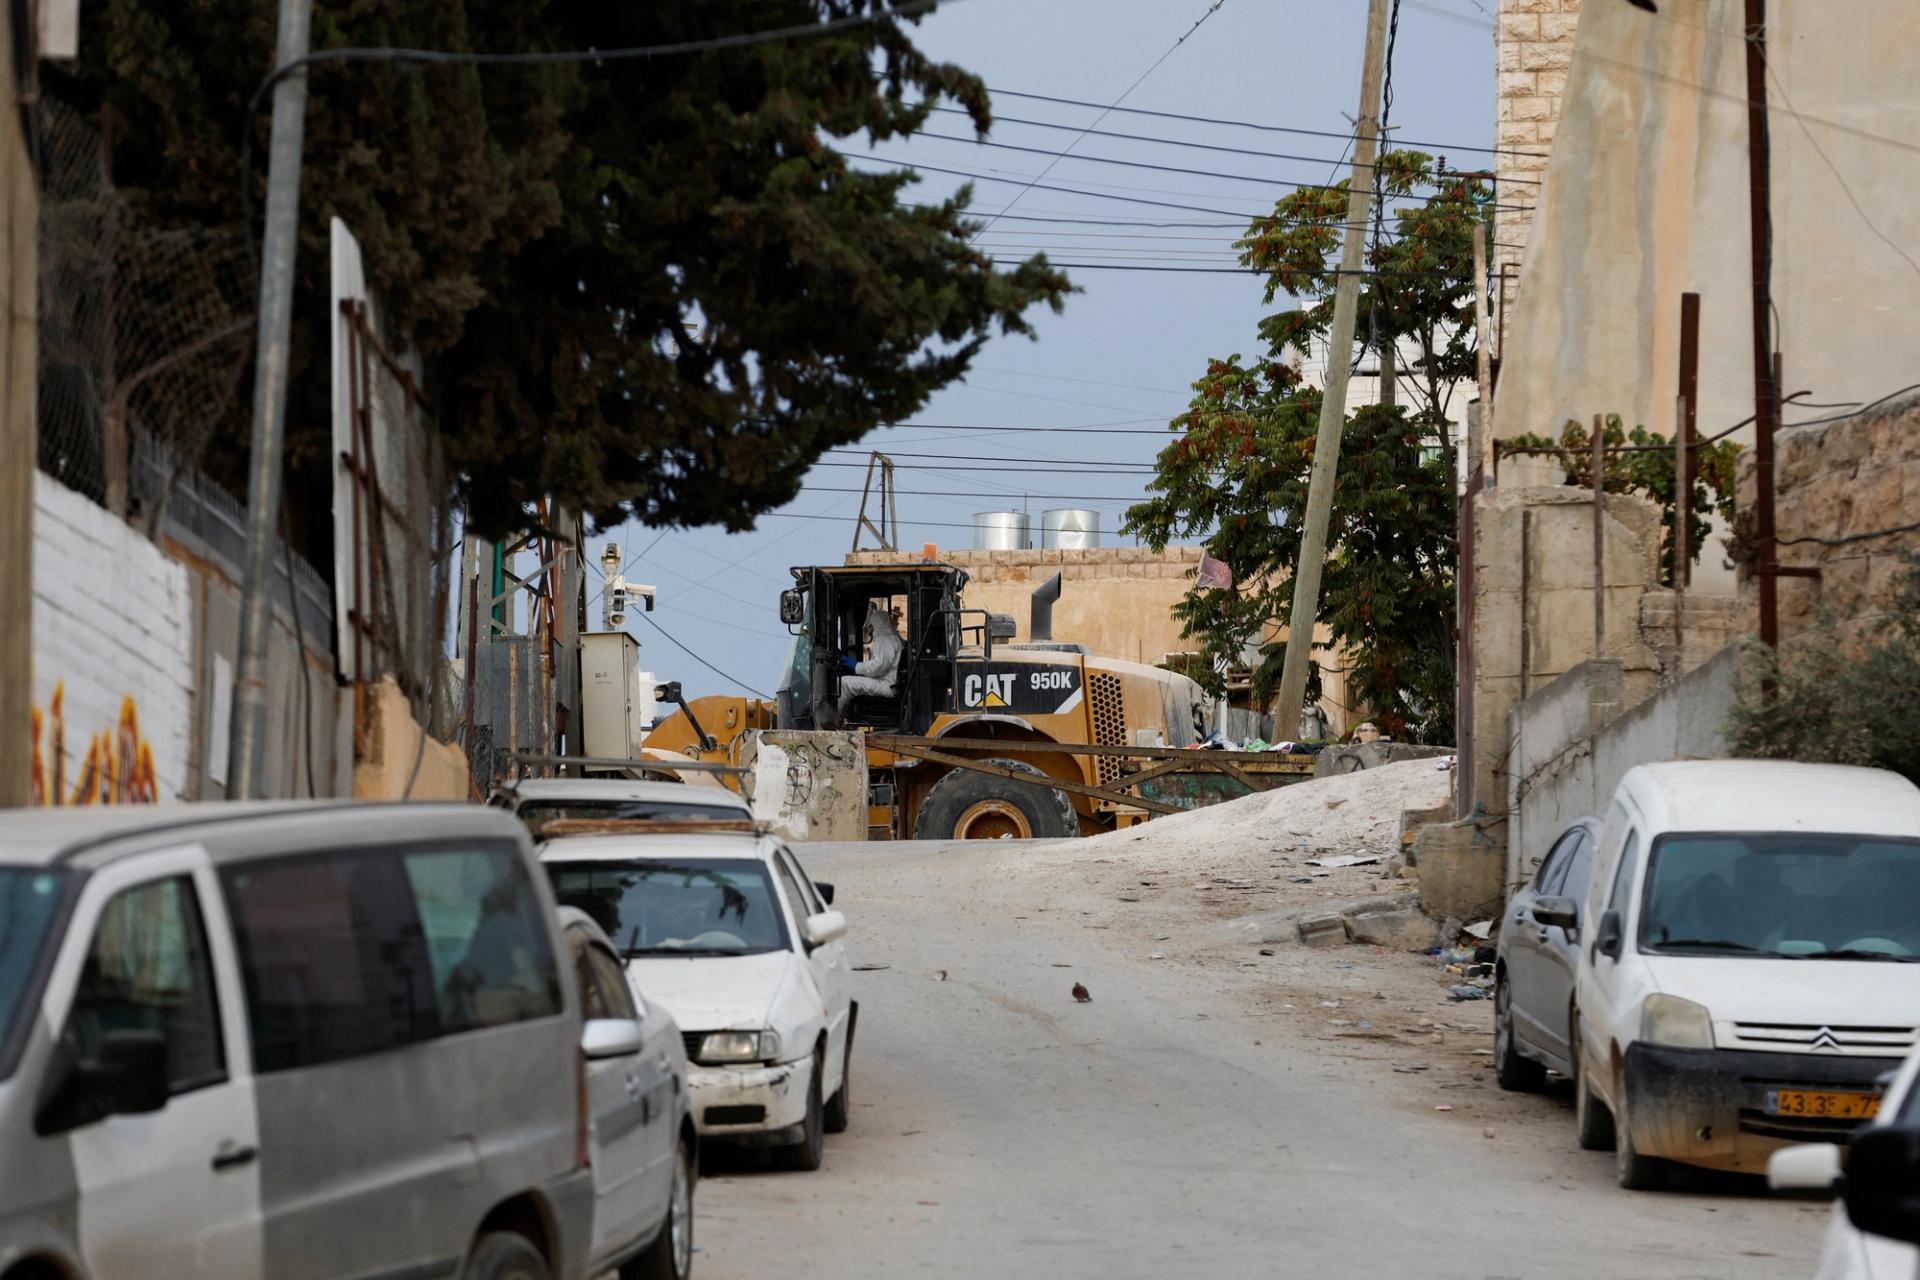 An Israeli security member drives a bulldozer used in an attack carried out by a Palestinian, who was shot and killed by Israeli troops, near the scene in Hebron in the Israeli-occupied West Bank October 9, 2023. REUTERS/Mussa Qawasma